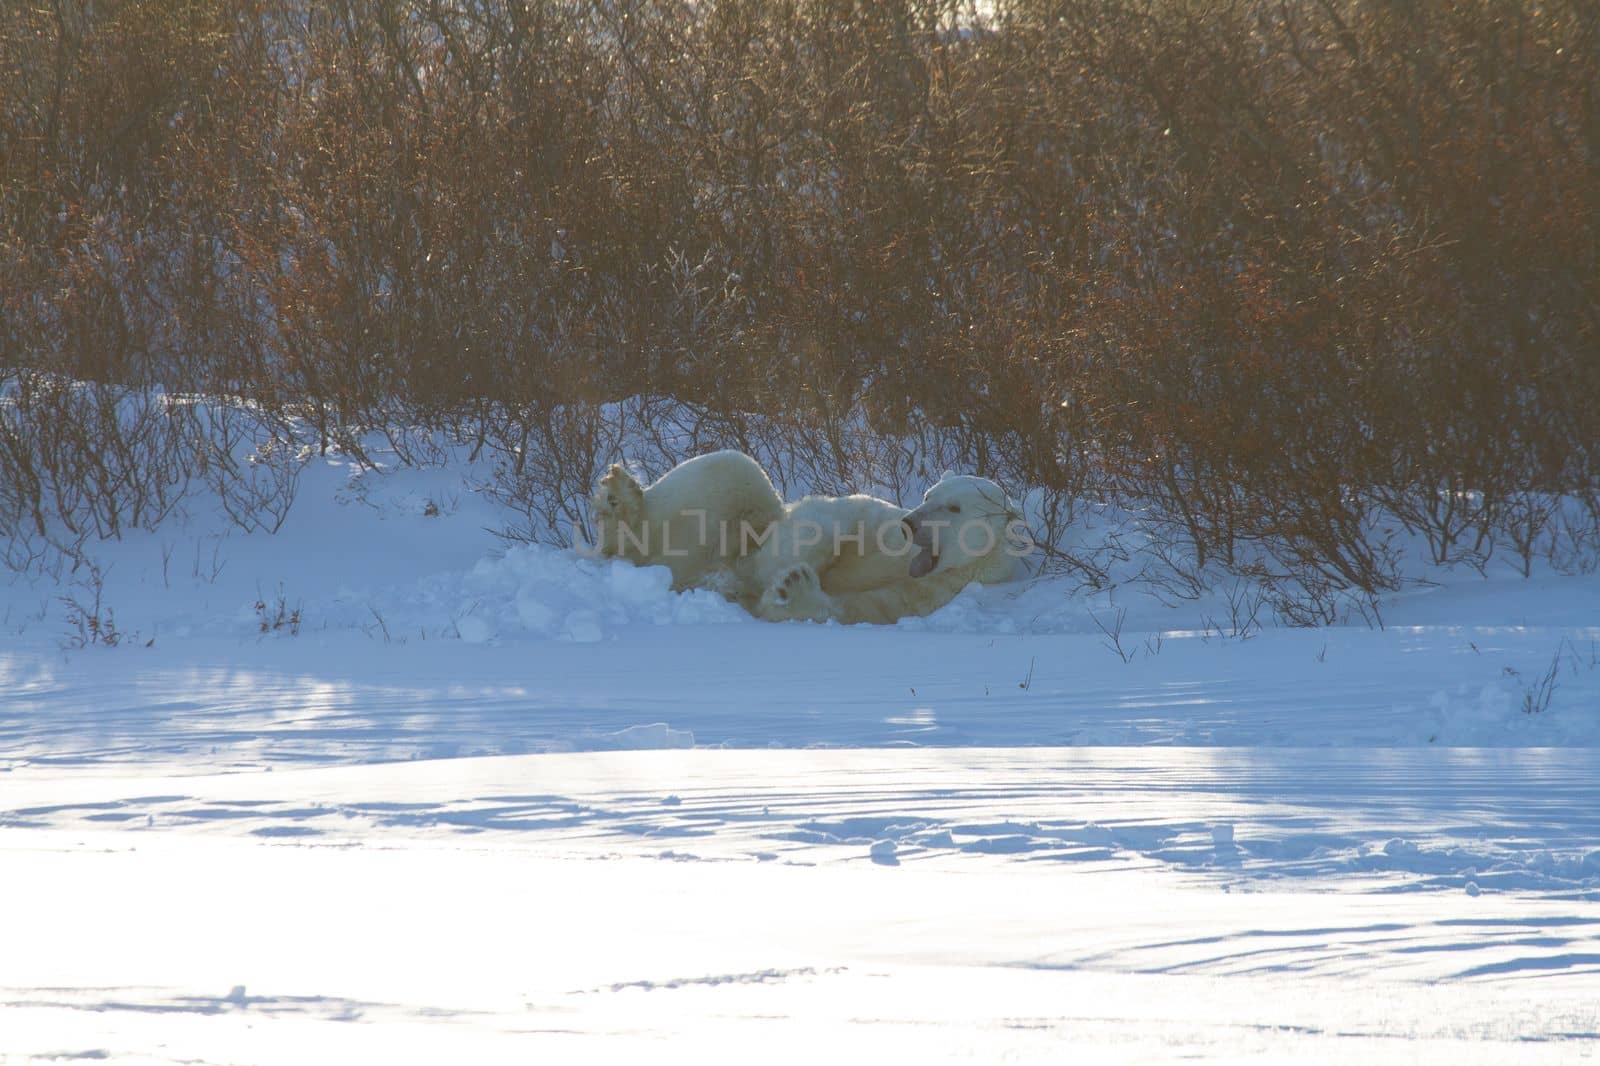 A polar bear waking up and yawning after sleeping in snow among willows by Granchinho